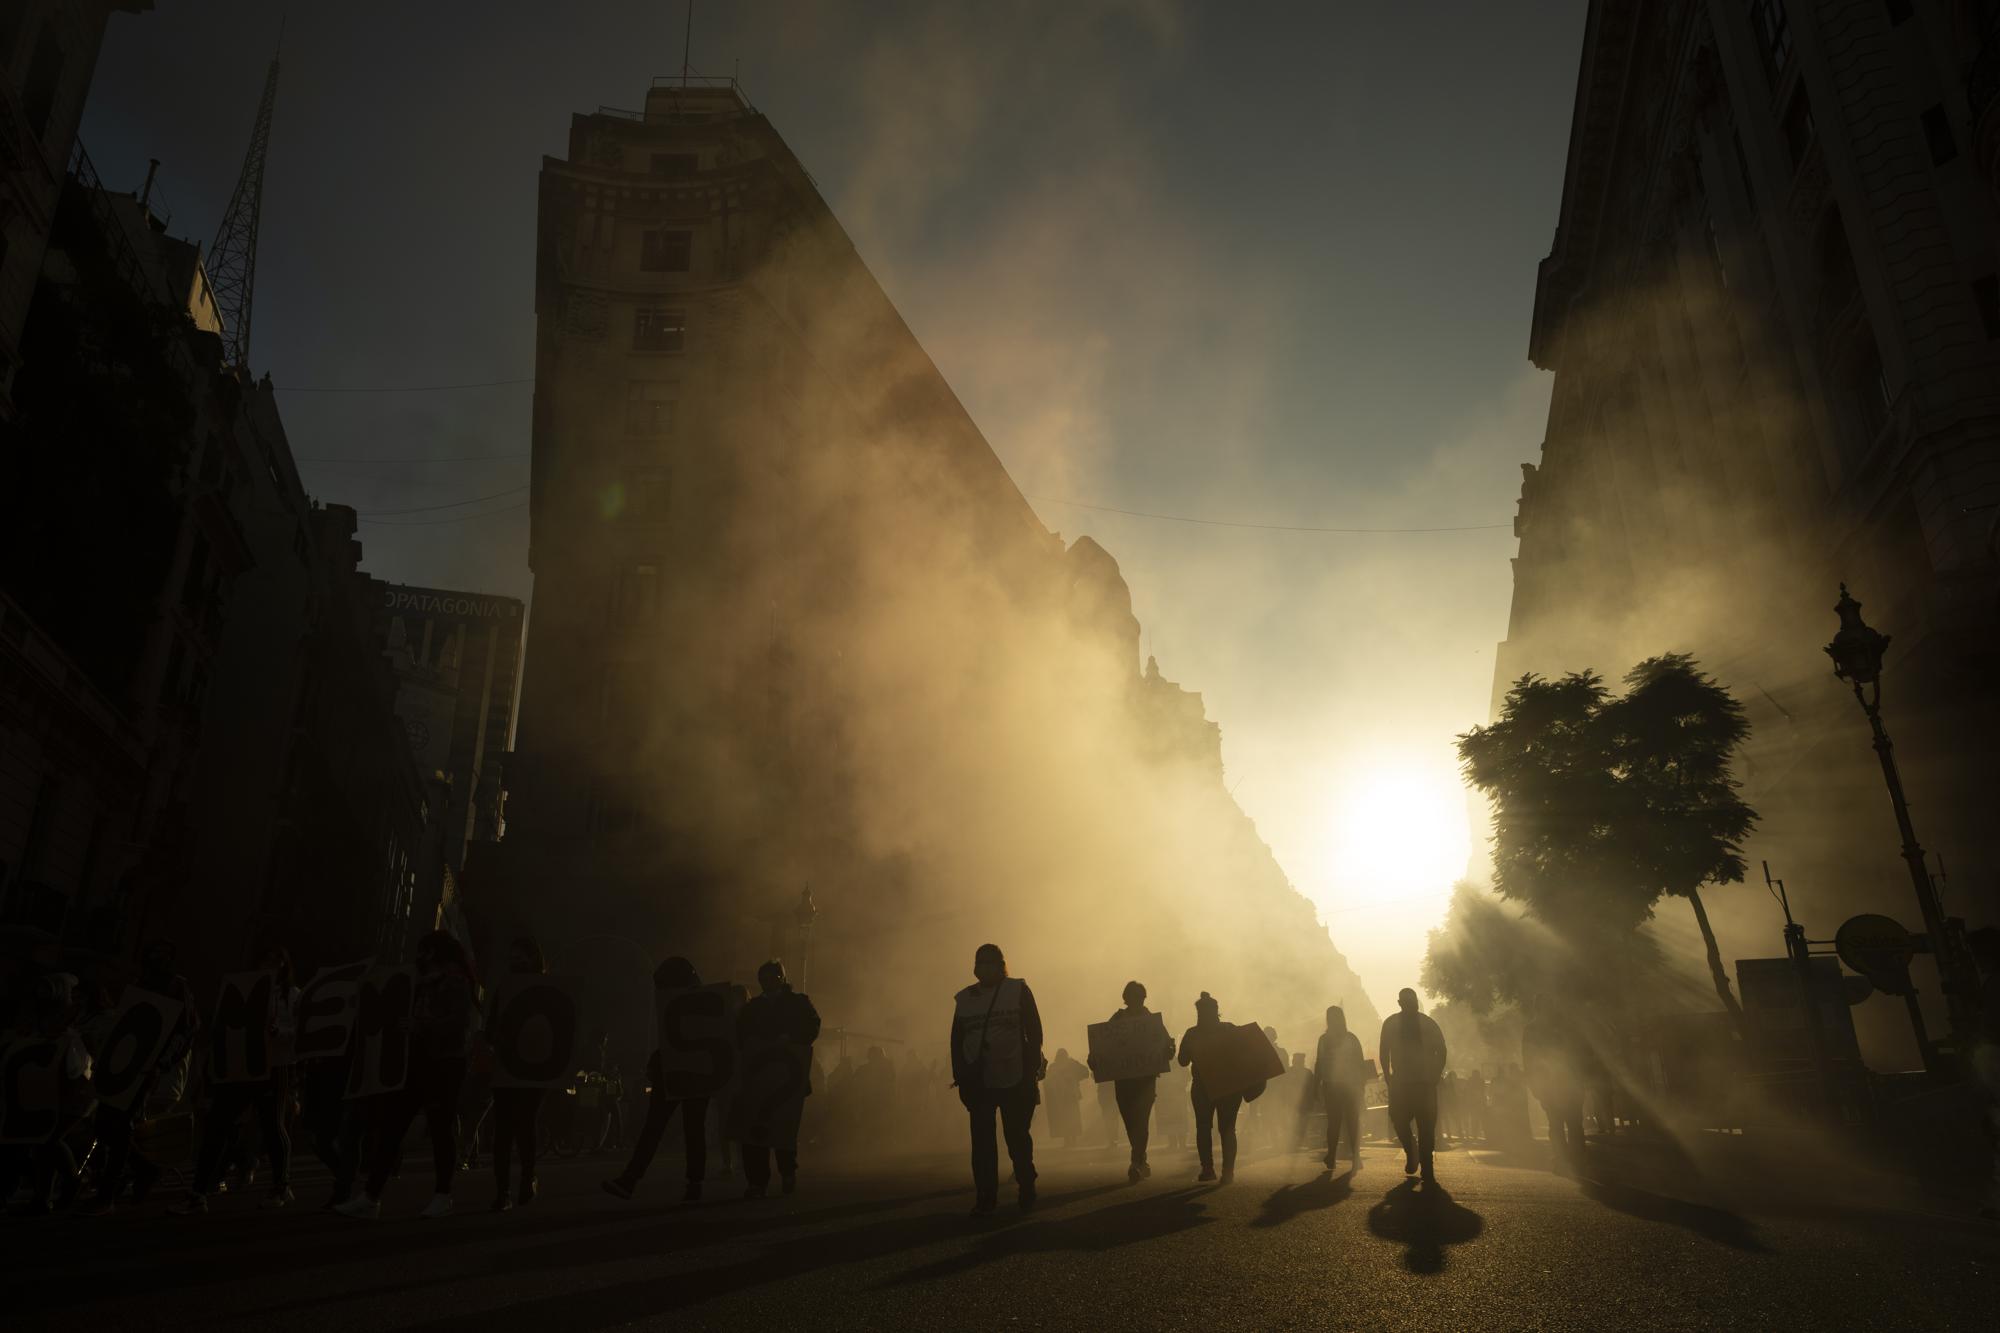 Protesters arrive at the Plaza de Mayo to demand higher salaries and more jobs, in Buenos Aires, Argentina, Thursday, May 12, 2022. (AP Photo/Victor R. Caivano)